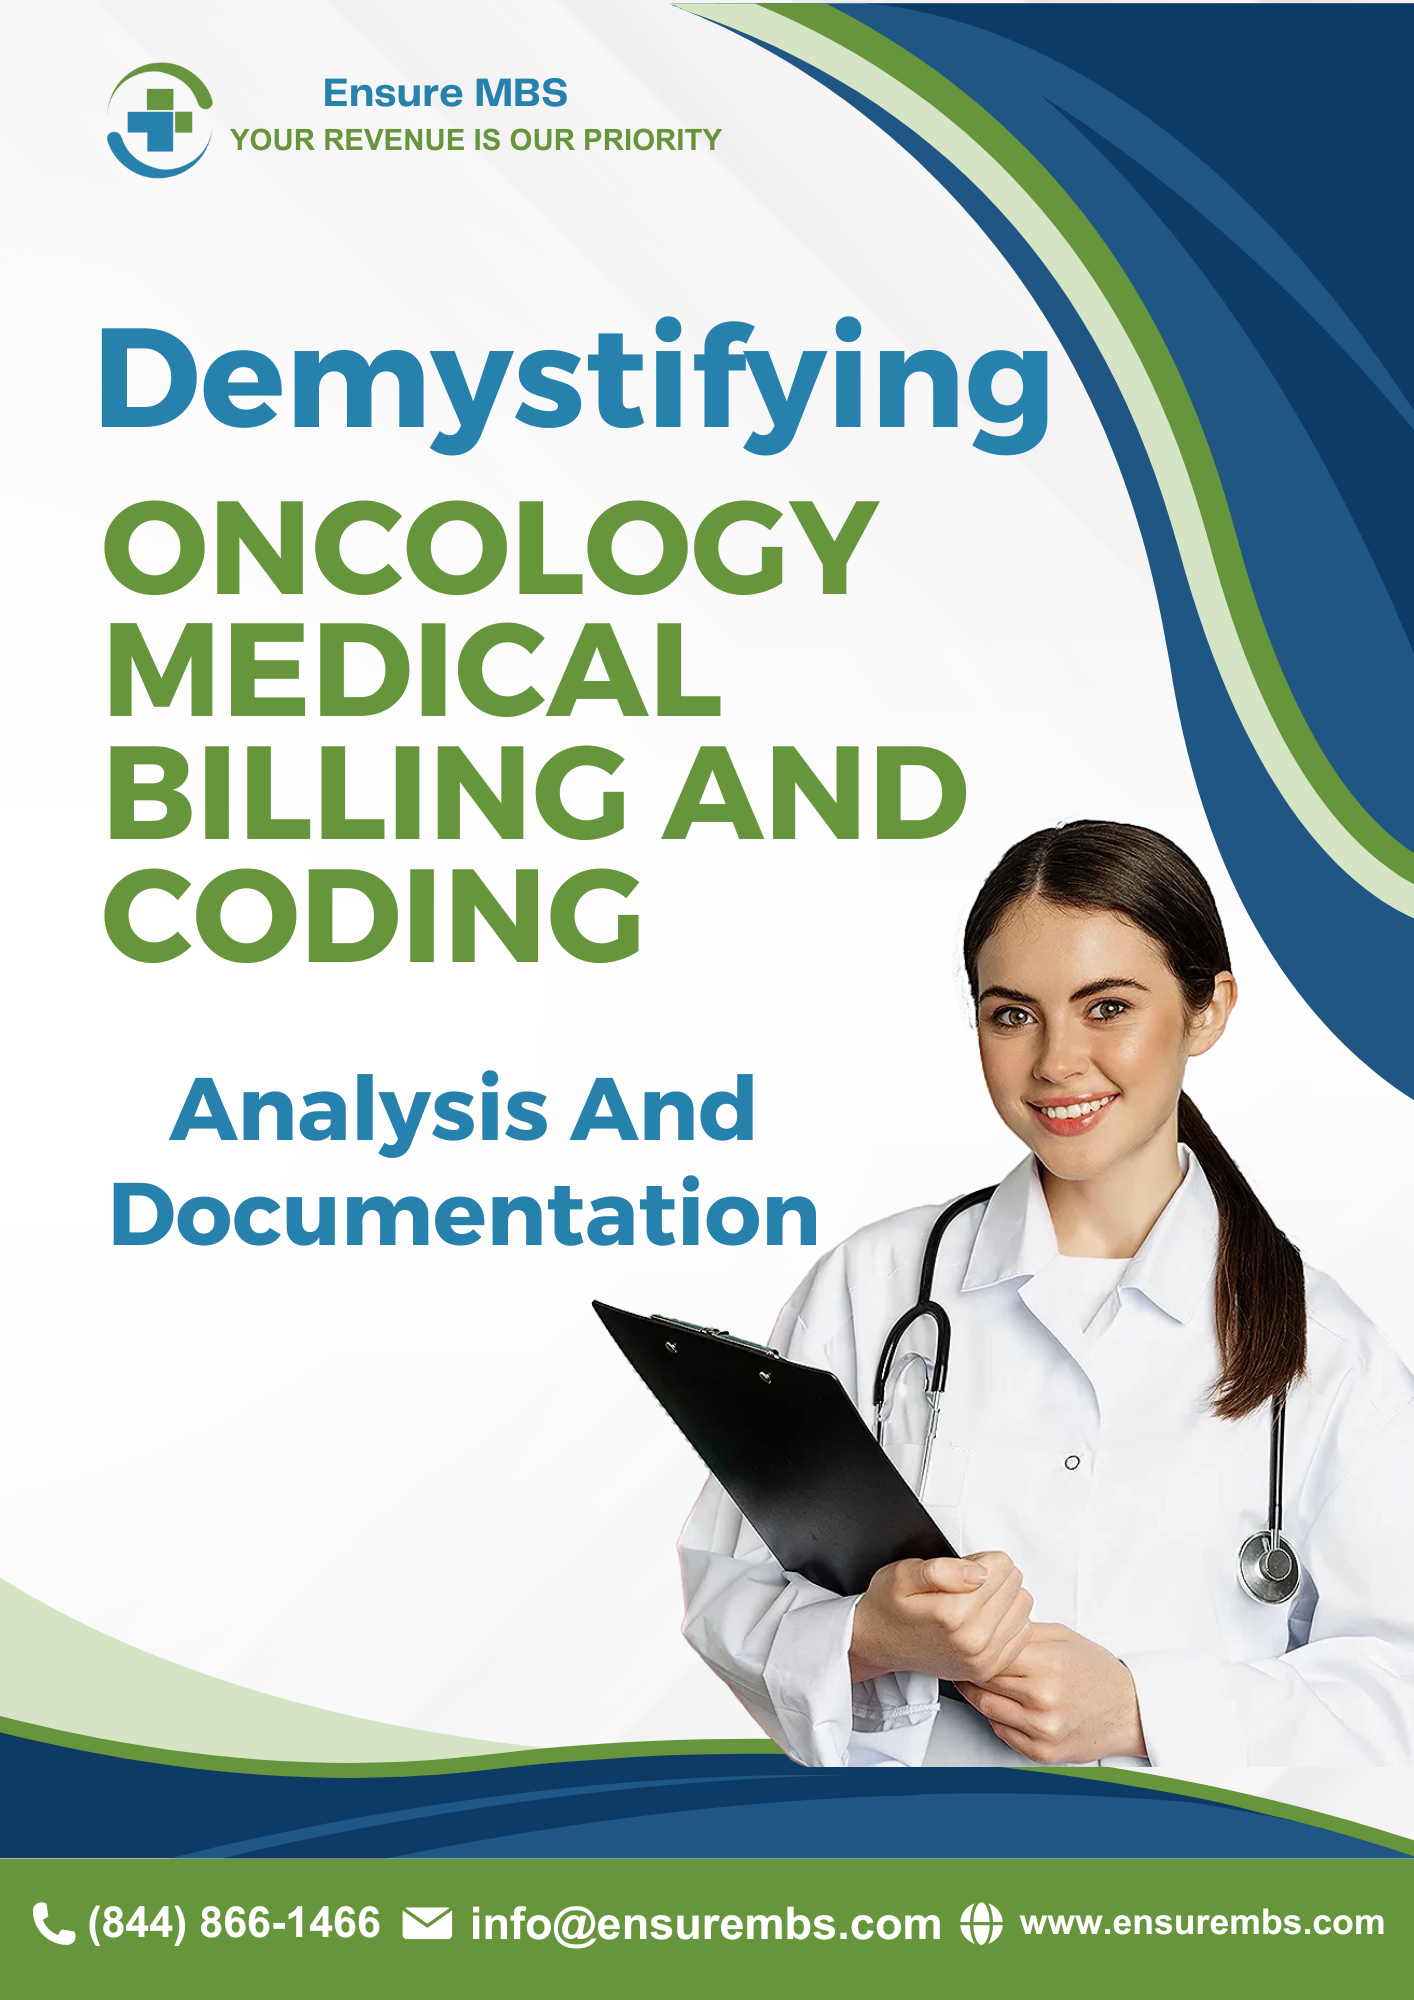 Demystifying Oncology Medical Billing - Ensure MBS